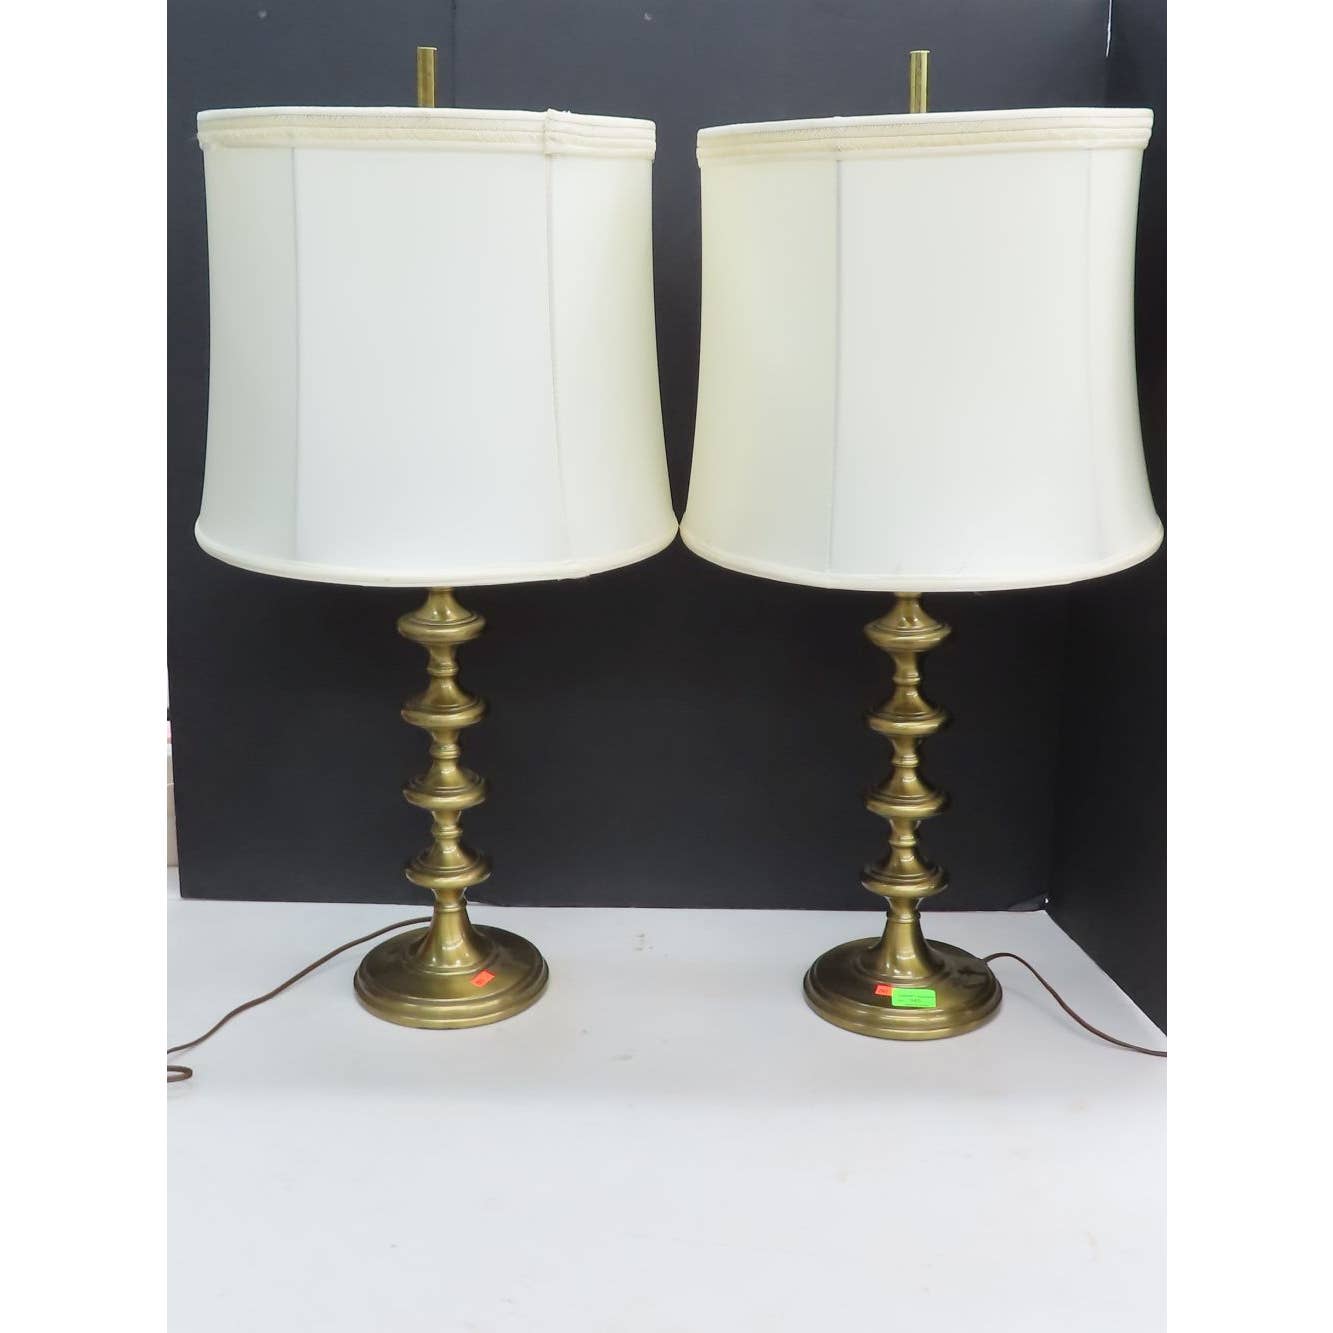 2 ANTIQUE BRASS TABLE LAMPS WITH FABRIC SHADES 32" TALL